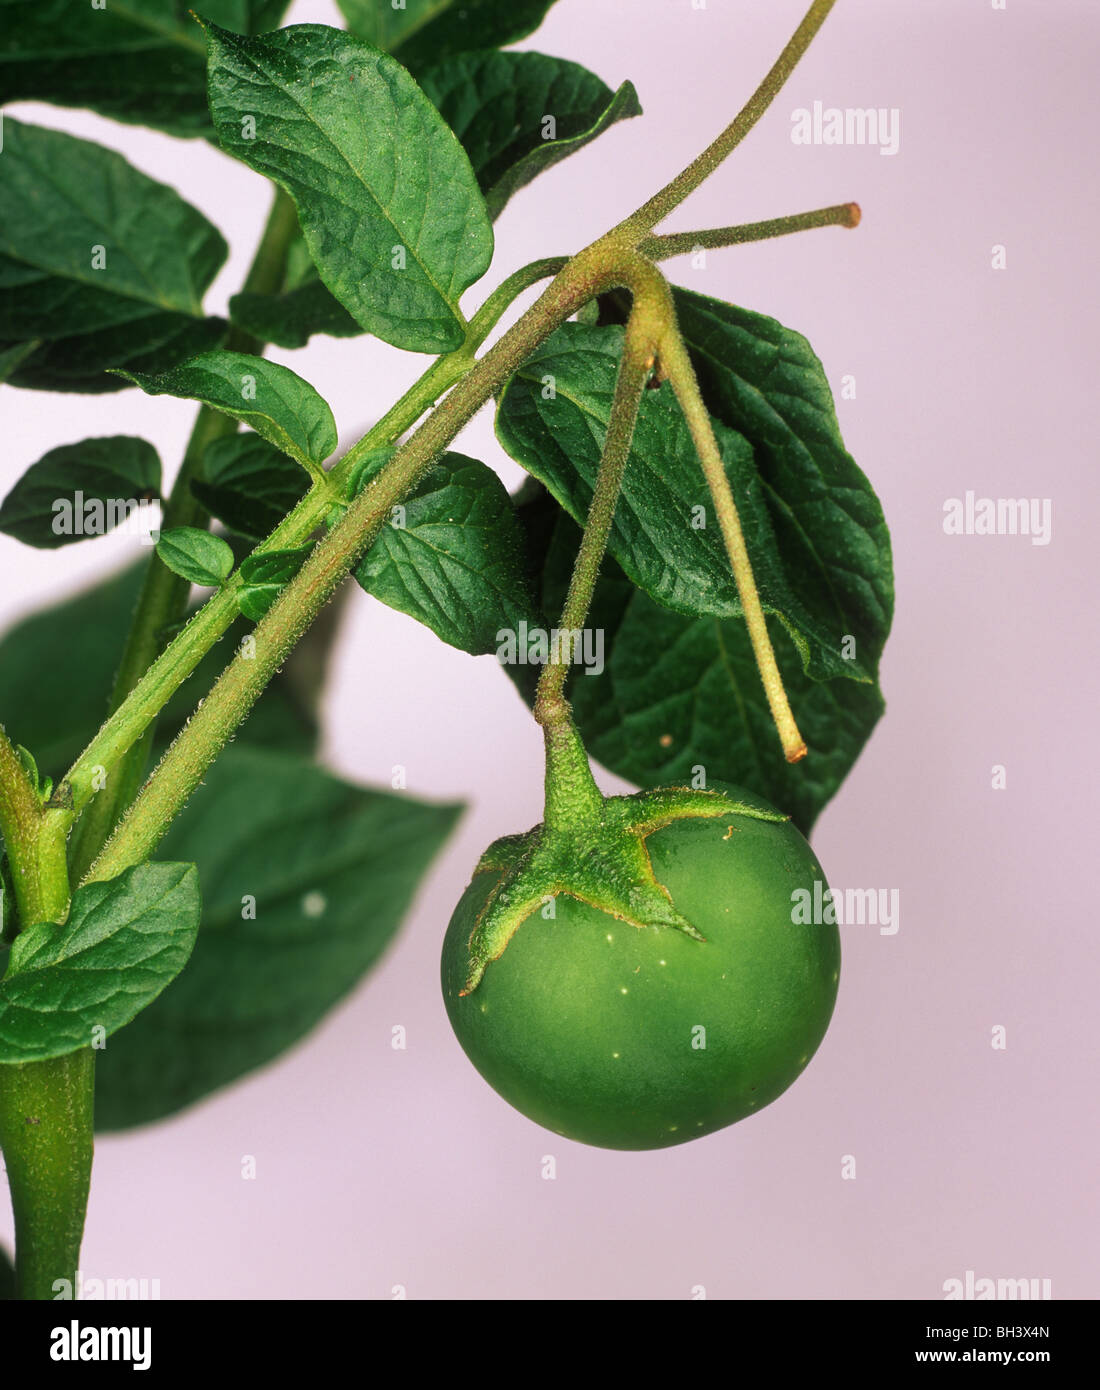 Fruit on a potato plant, unusual and poisonous Stock Photo